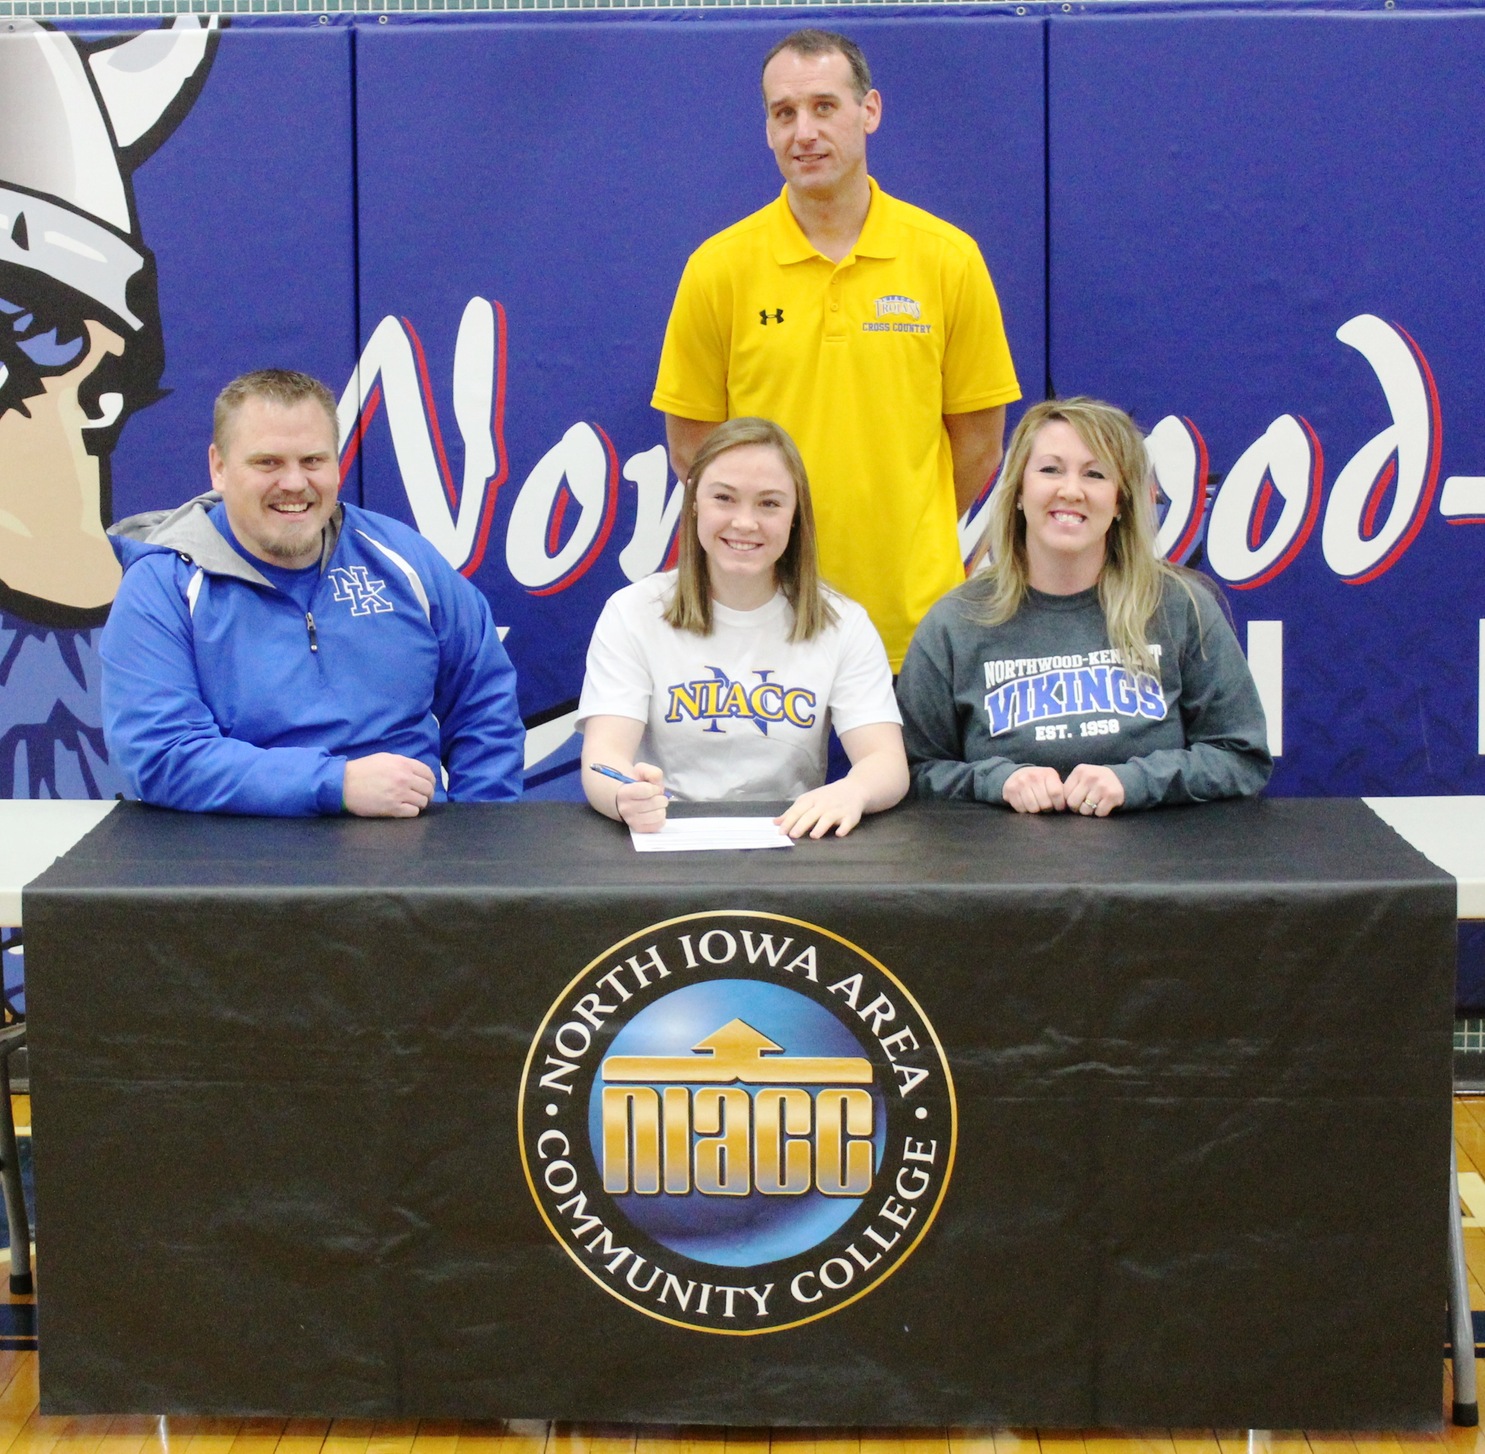 Northwood-Kensett's Ivy Rollene signed a national letter of intent Tuesday to run cross country and track and field at NIACC next season.